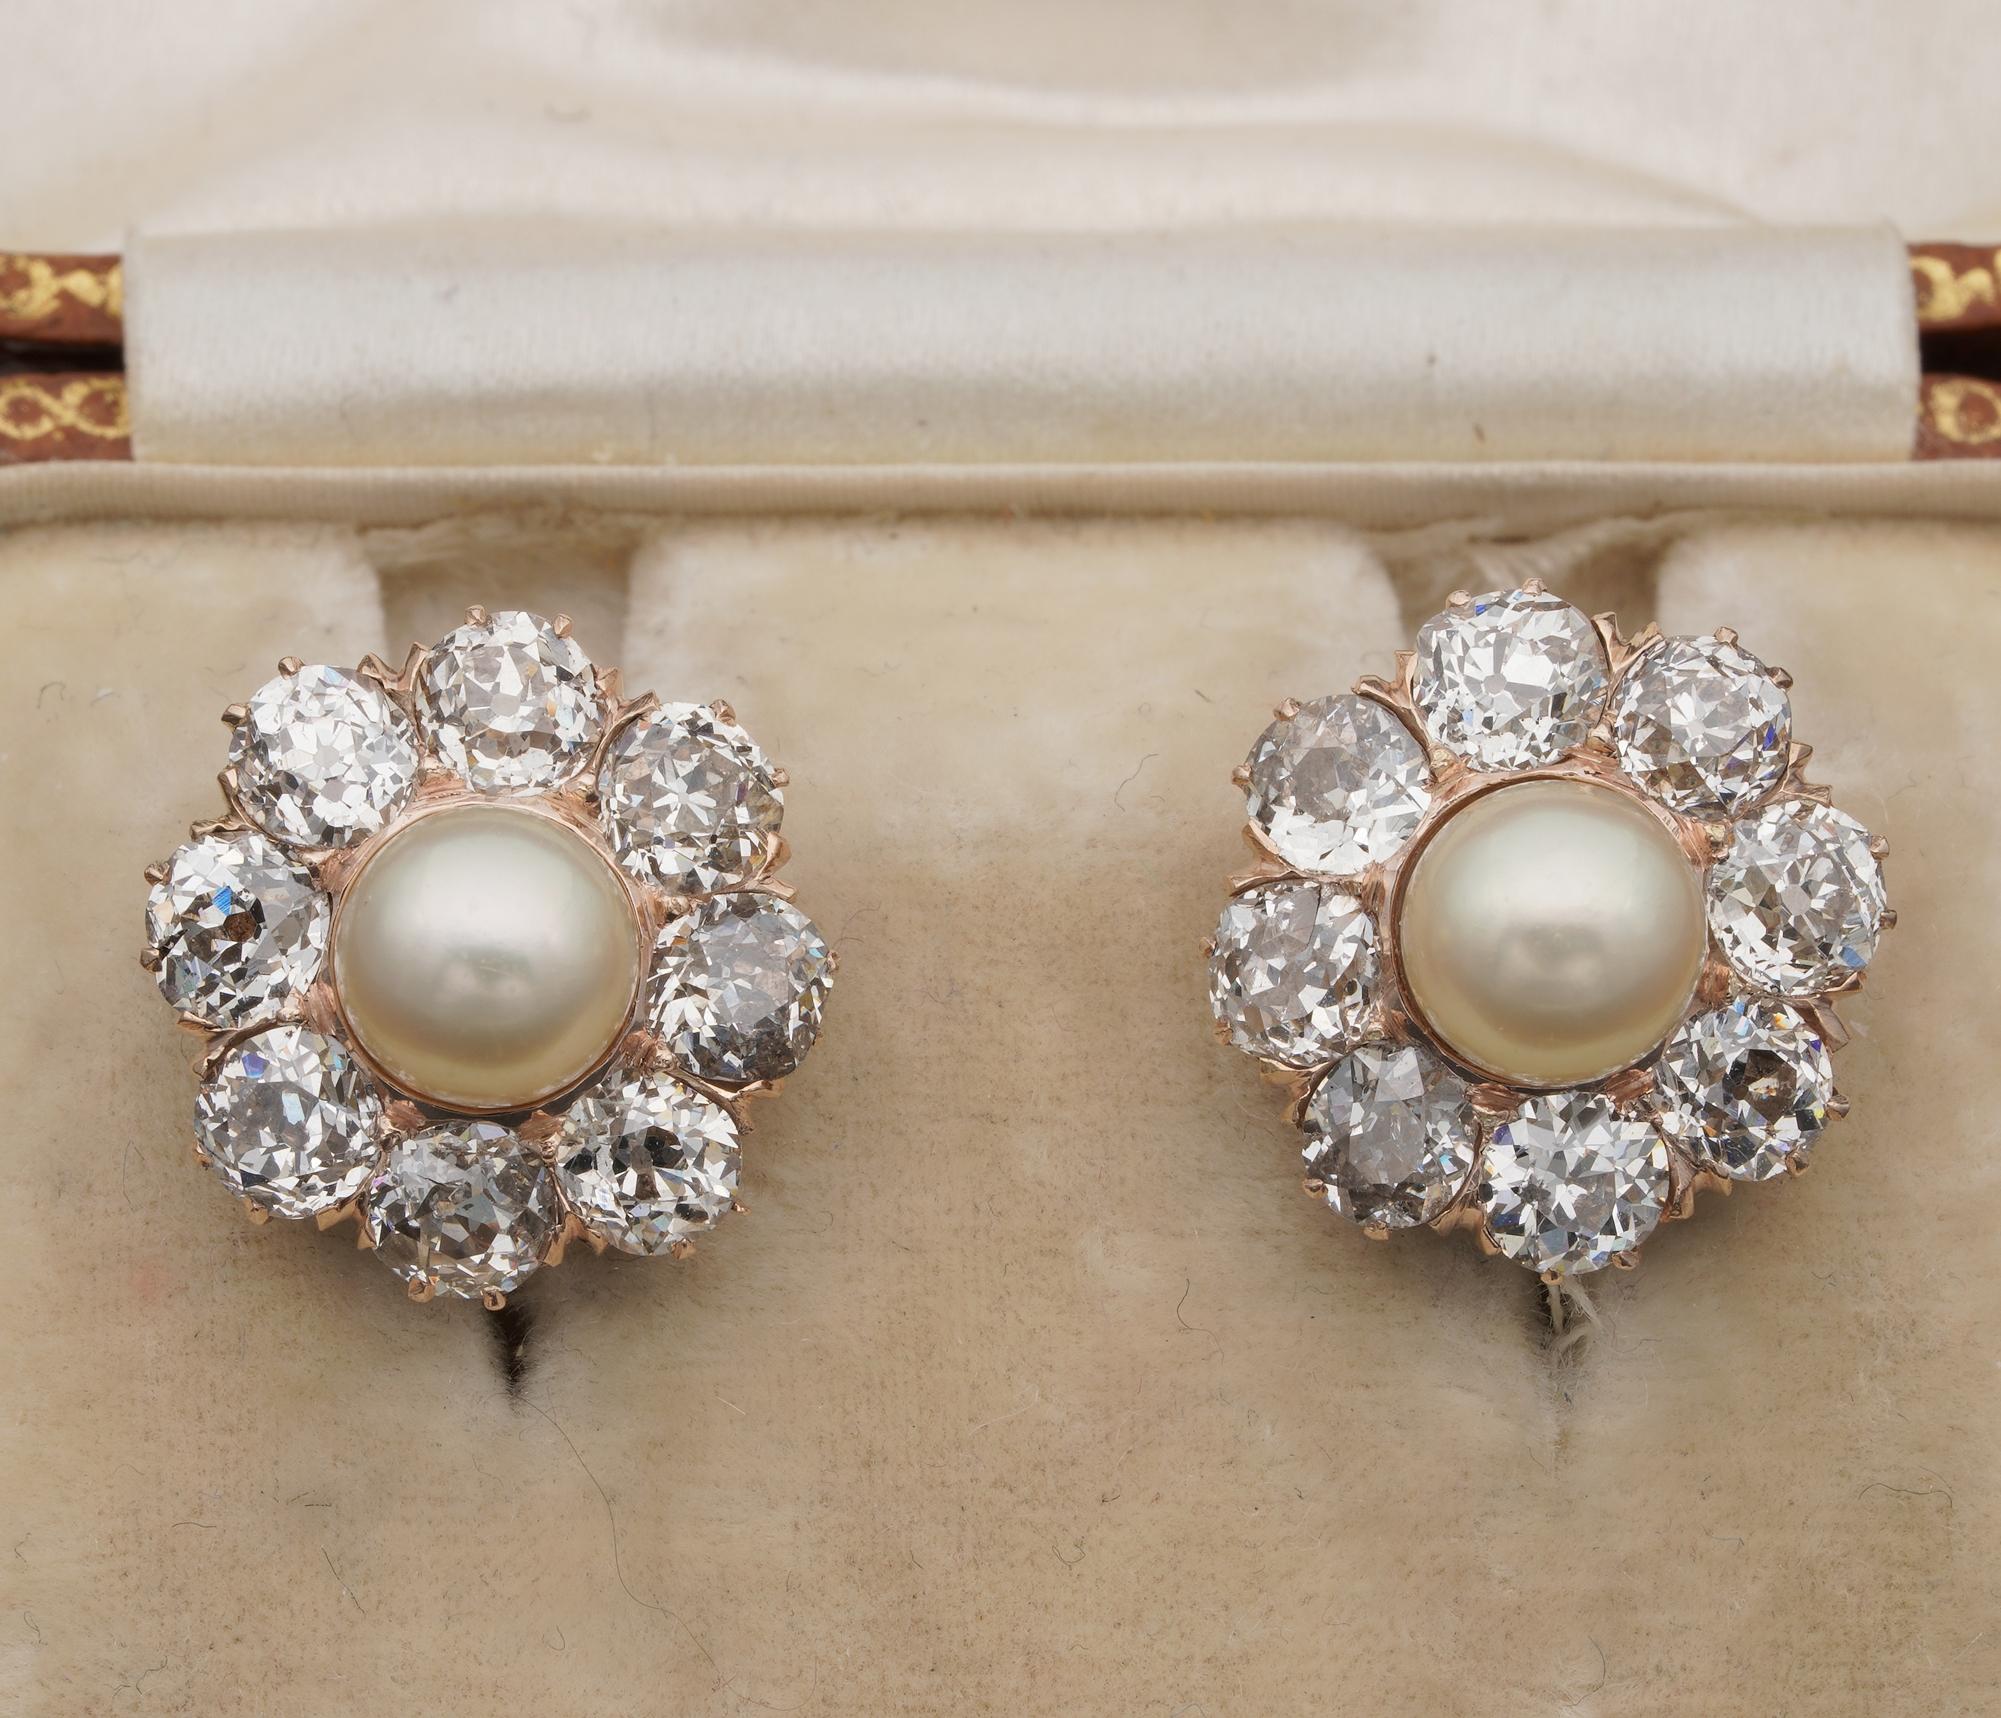 Impressive Victorian era Diamond Pearl earrings,1890 ca.
Hand crafted of solid 18 Kt gold
Boasting beautiful Victorian crafting and high content of Diamonds surrounding a rare Pearl in the middle, classy floret design
Centre Pearl is salt water